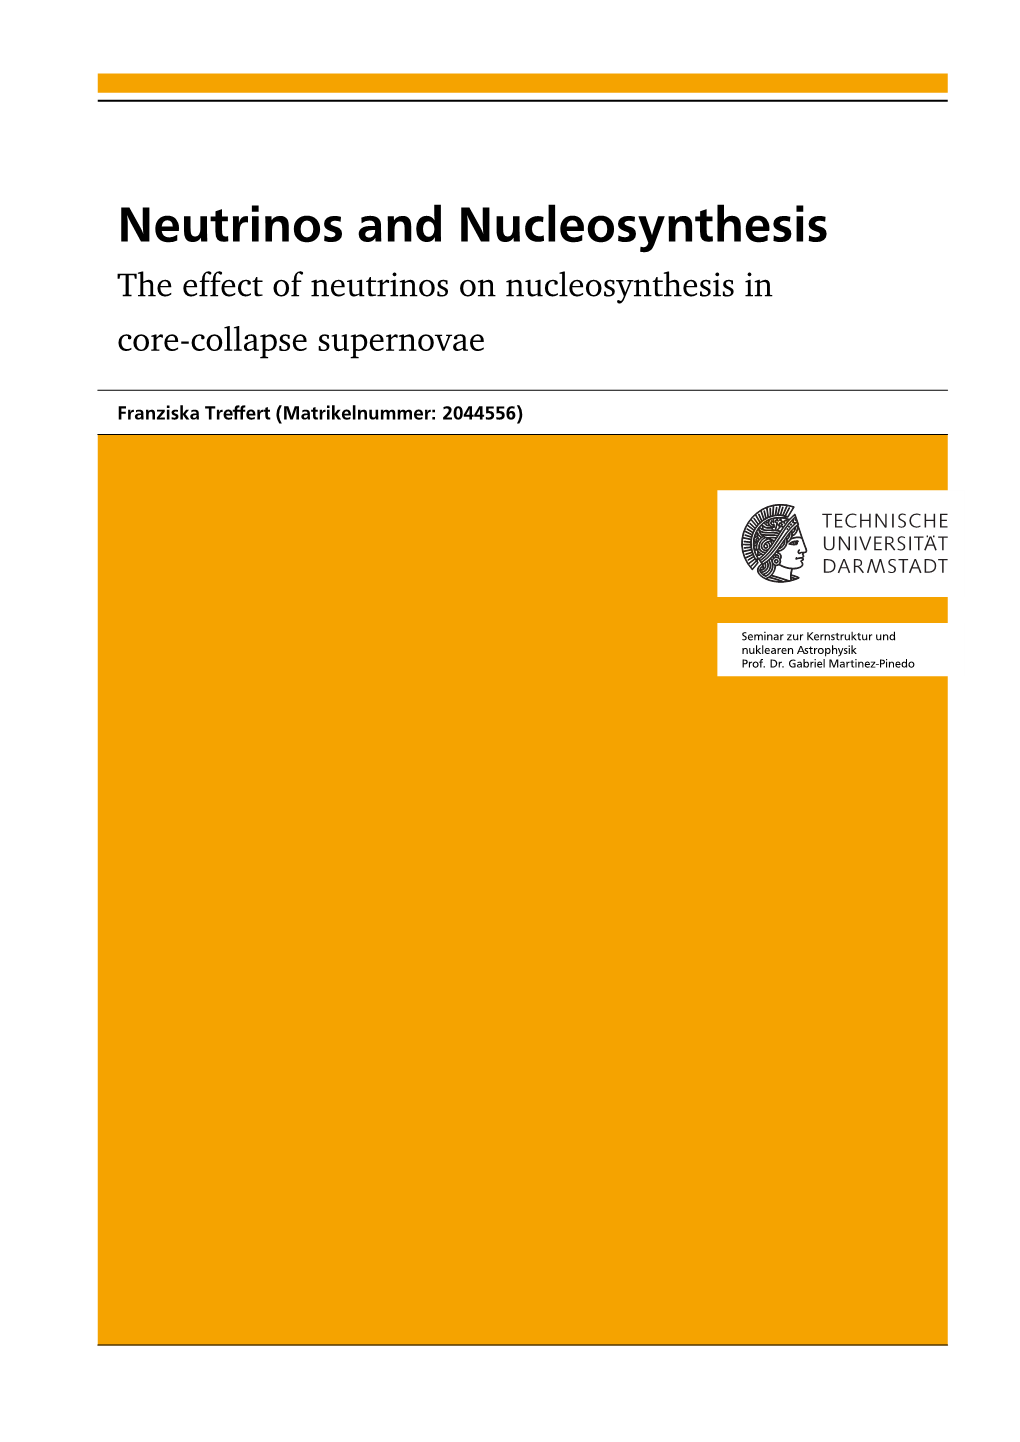 Neutrinos and Nucleosynthesis the Effect of Neutrinos on Nucleosynthesis in Core-Collapse Supernovae